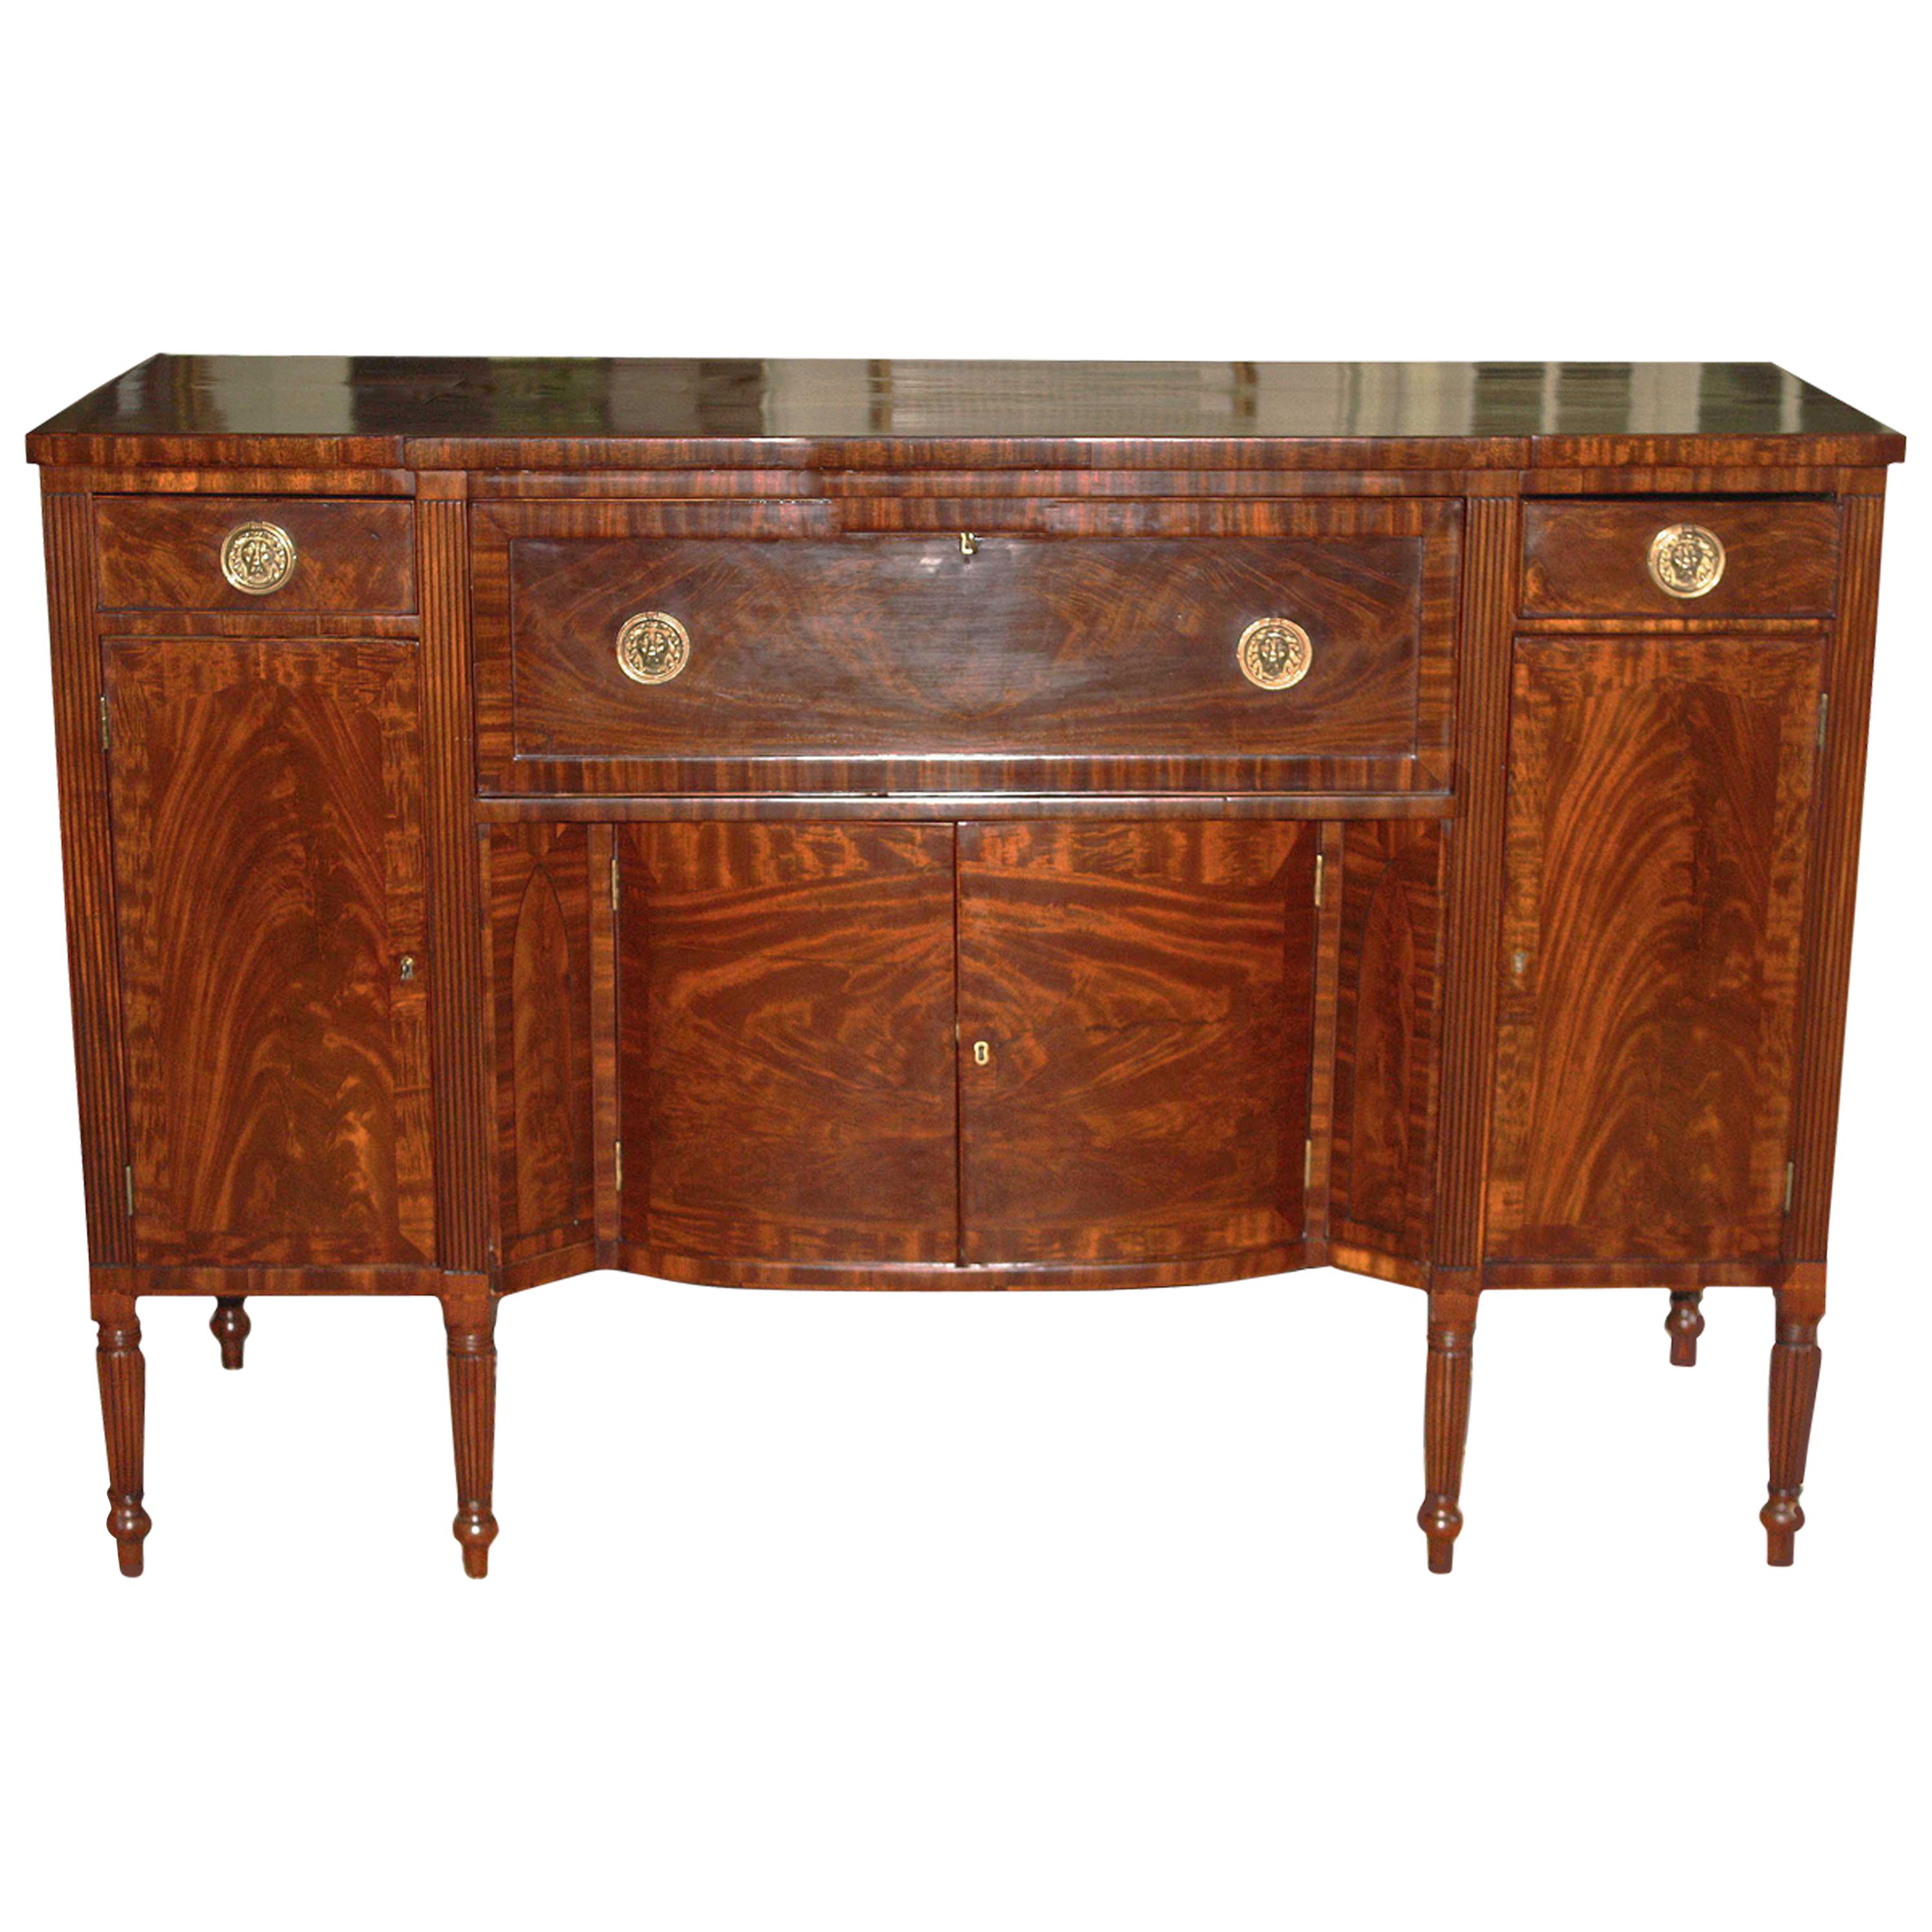 Baltimore Federal Sideboard with 'Butler's Secretary' For Sale